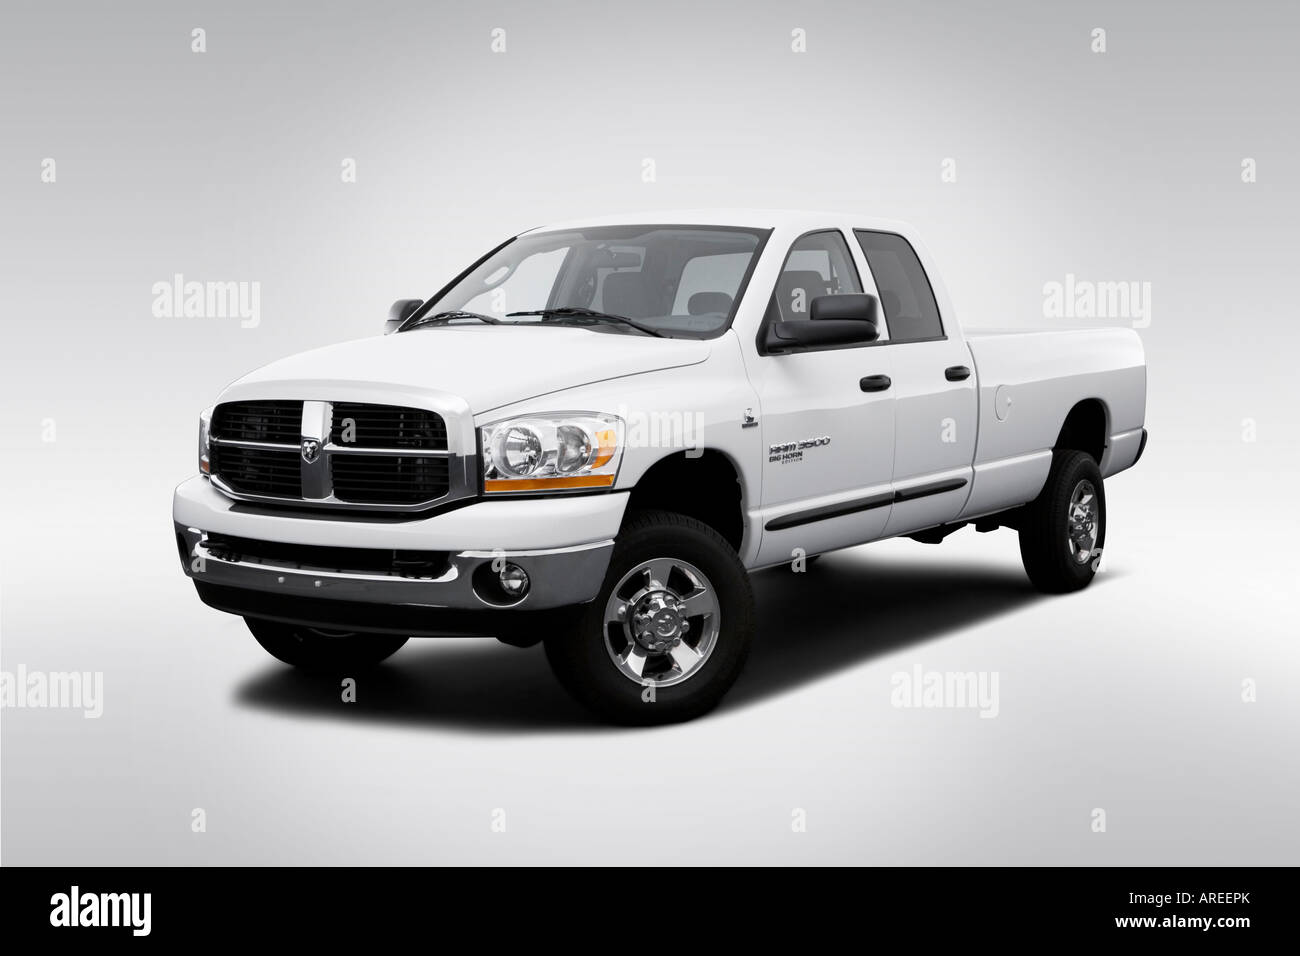 2006 Dodge Ram 3500 DRW SLT in White - Front angle view Stock Photo - Alamy